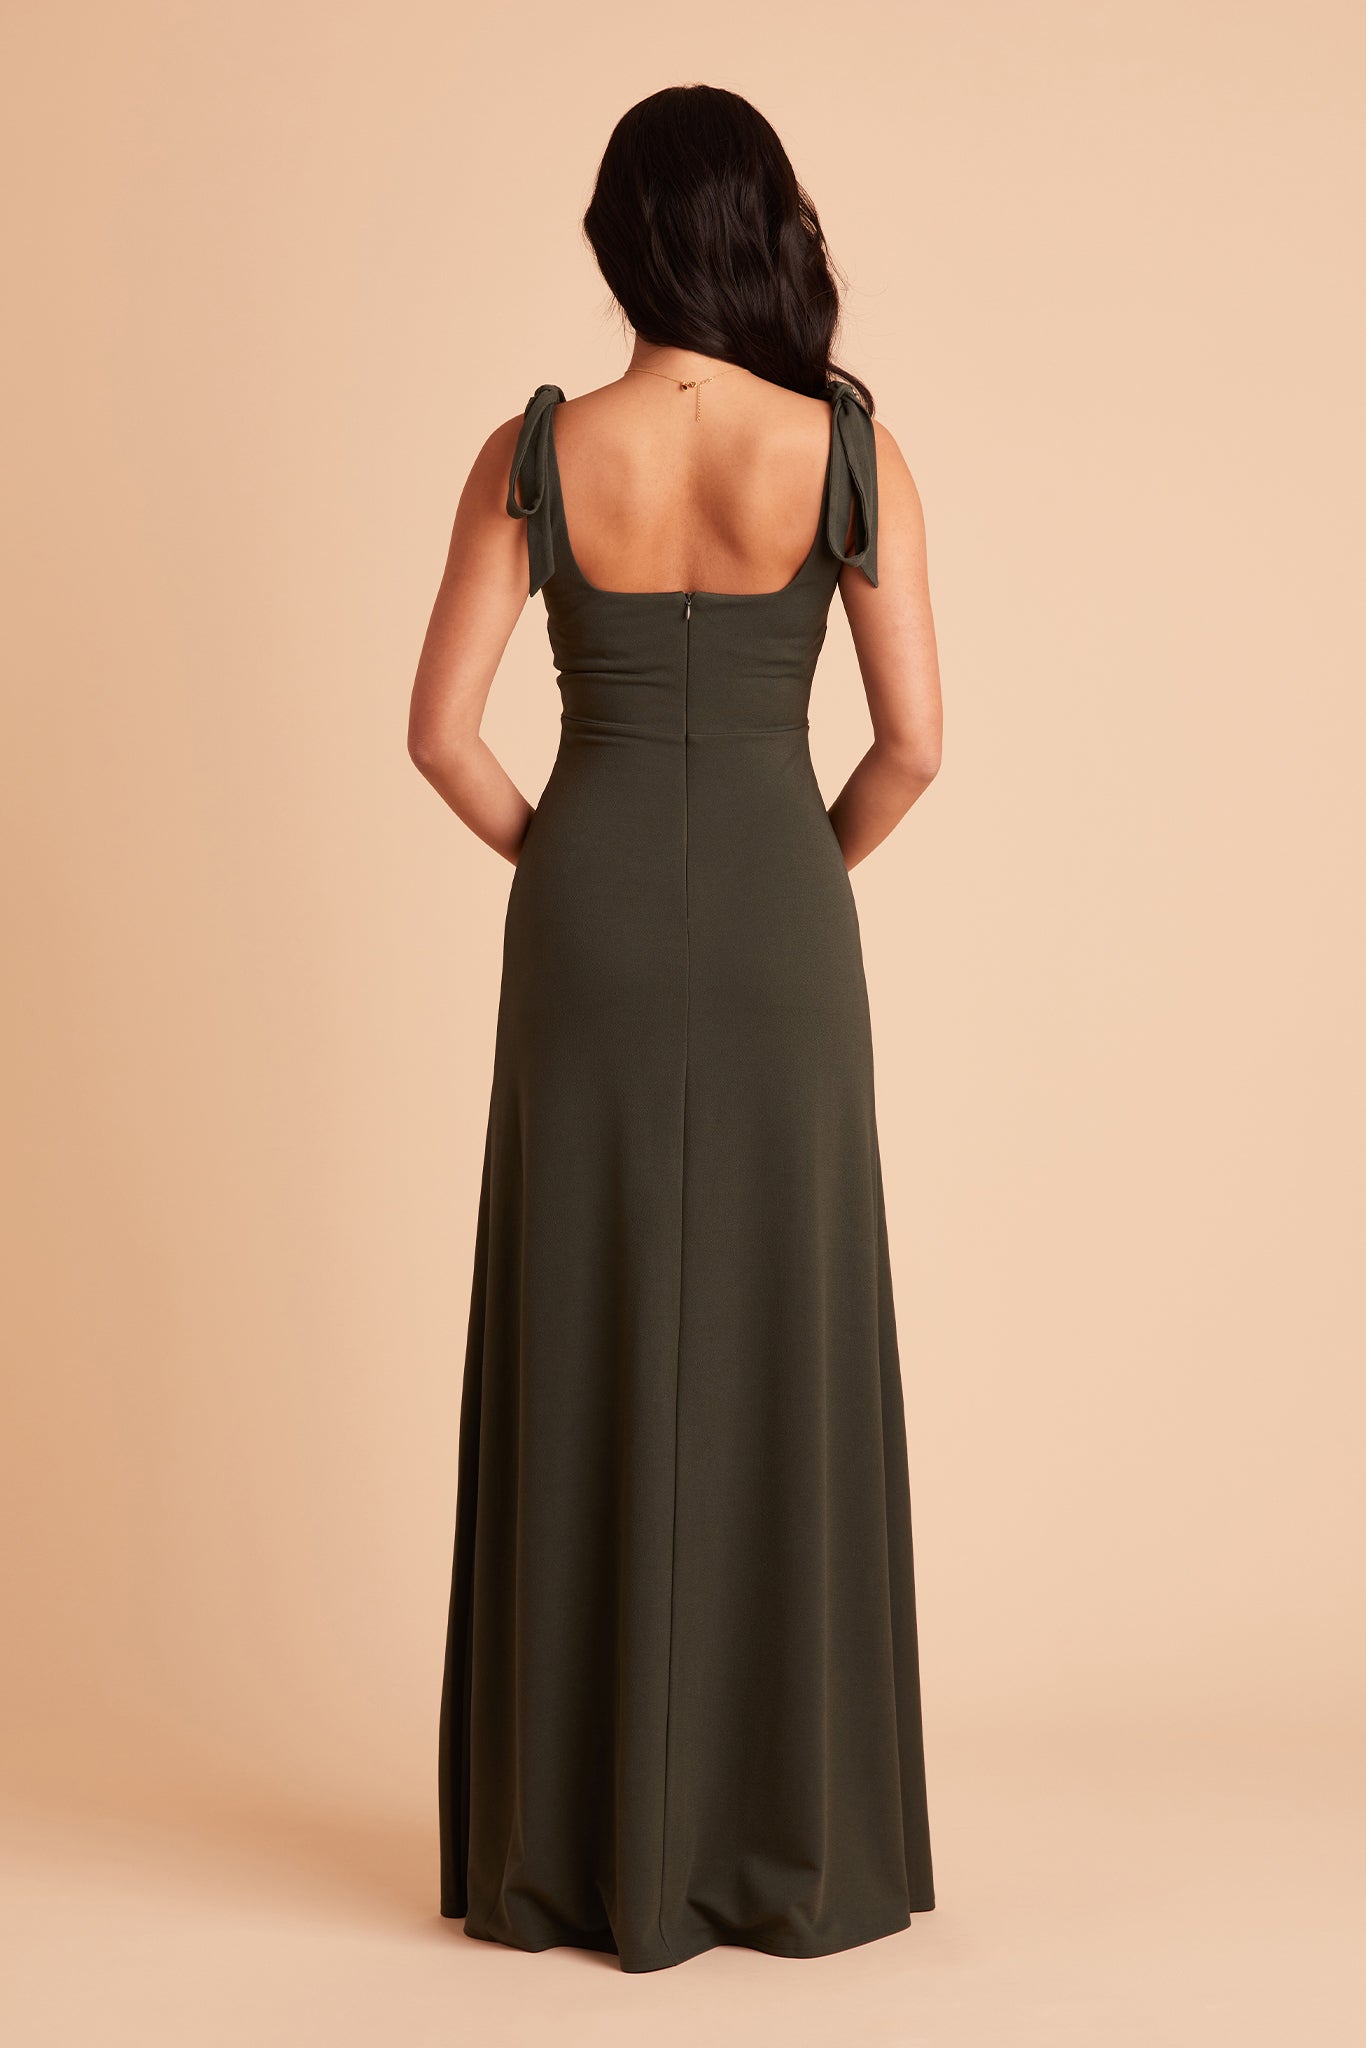 Alex convertible bridesmaid dress with slit in olive crepe by Birdy Grey, back view